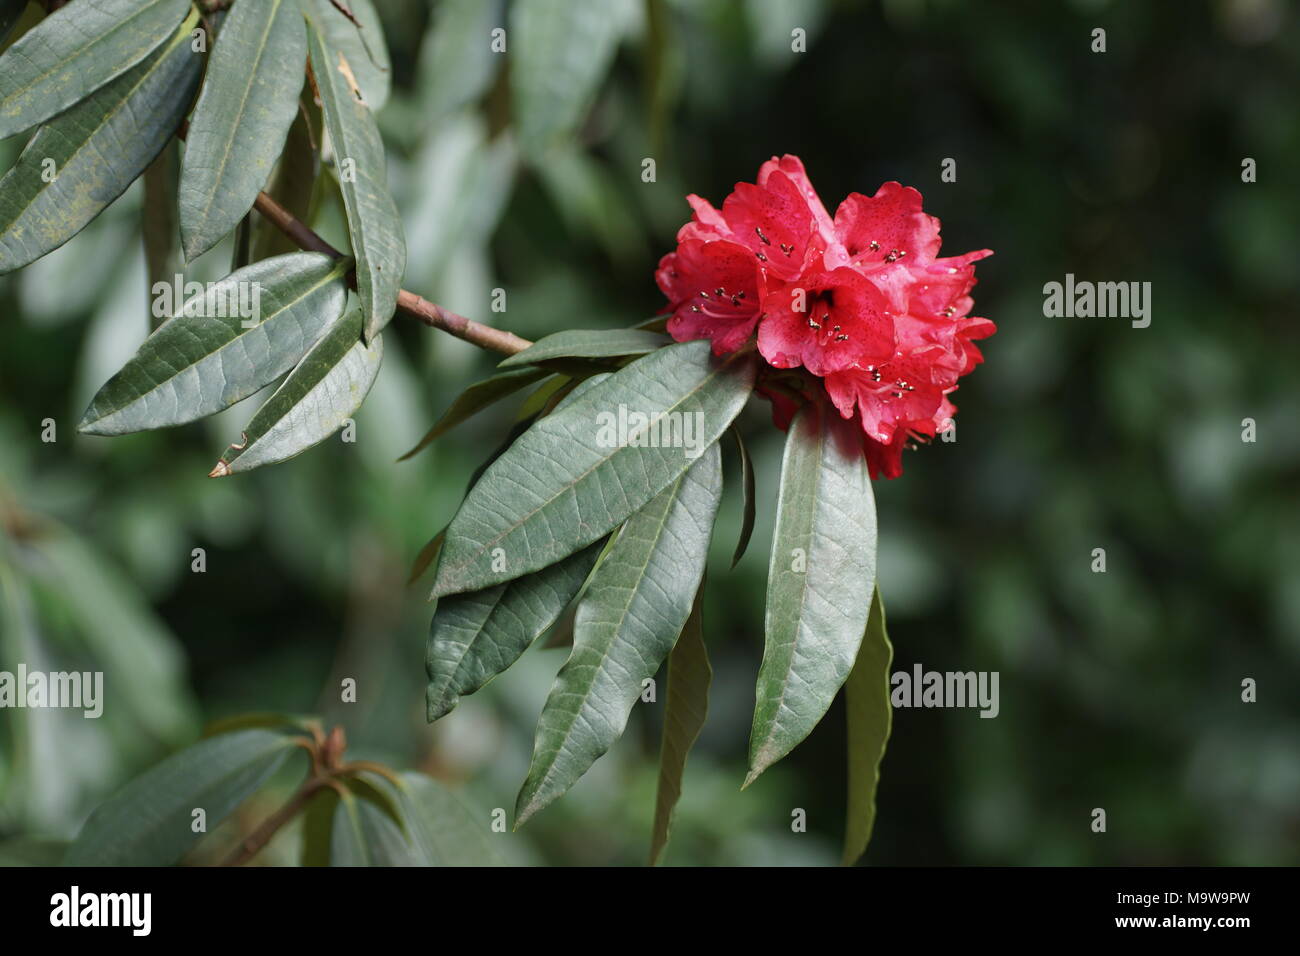 flowers of Rhododendron arboreum at Clyne gardens, Swansea, Wales, UK. Stock Photo